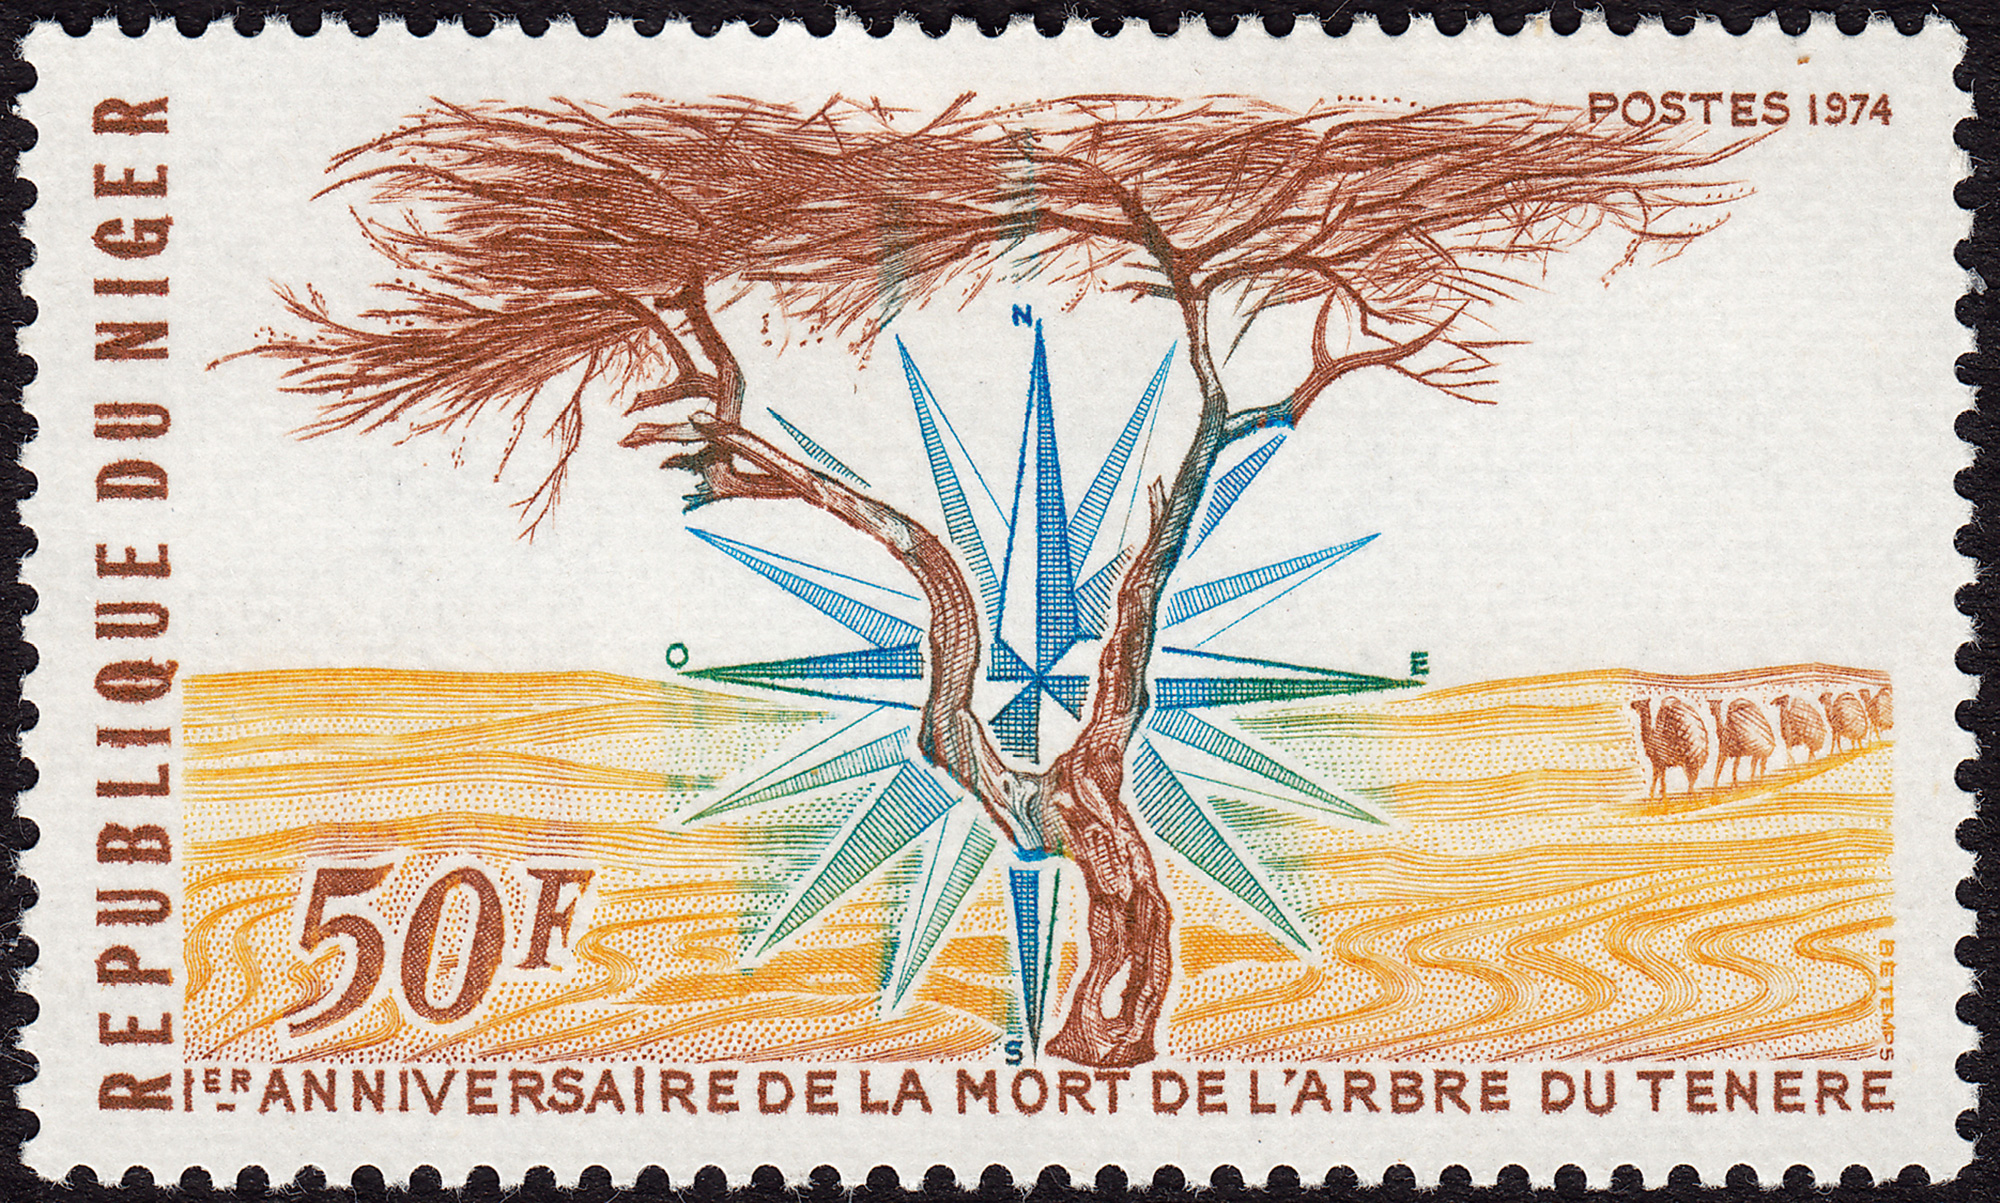 Nigerien stamp issued in 1974 commemorating the first anniversary of the death of the Tree of Ténéré. Courtesy Timbres de France & FDC.